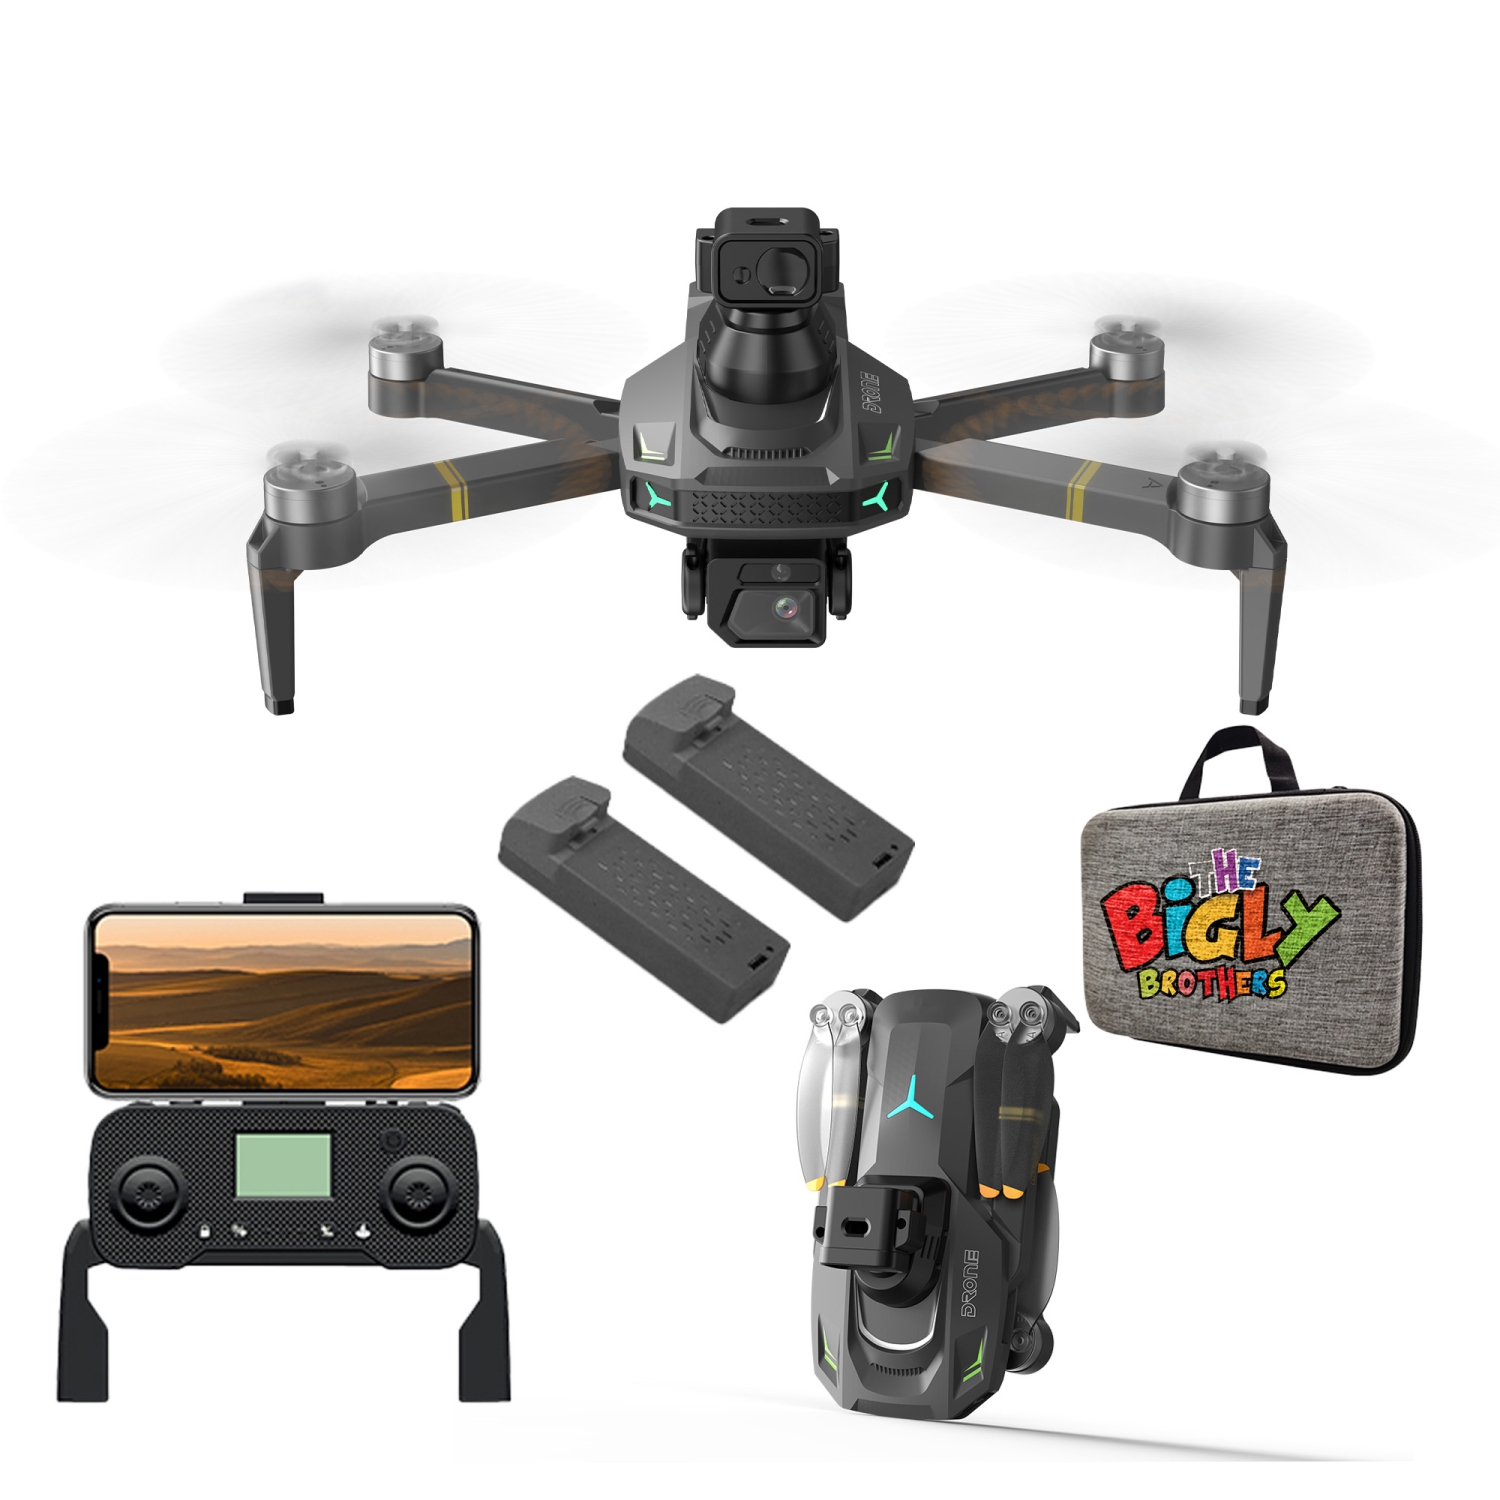 The Bigly Brothers E59 Mark III Delta Black Superior Edition, GPS Drone, Below 249 Grams, 4k Camera, 1 Key Return Home, All Around Obstacle Avoidance, Case & 1 Batt Included